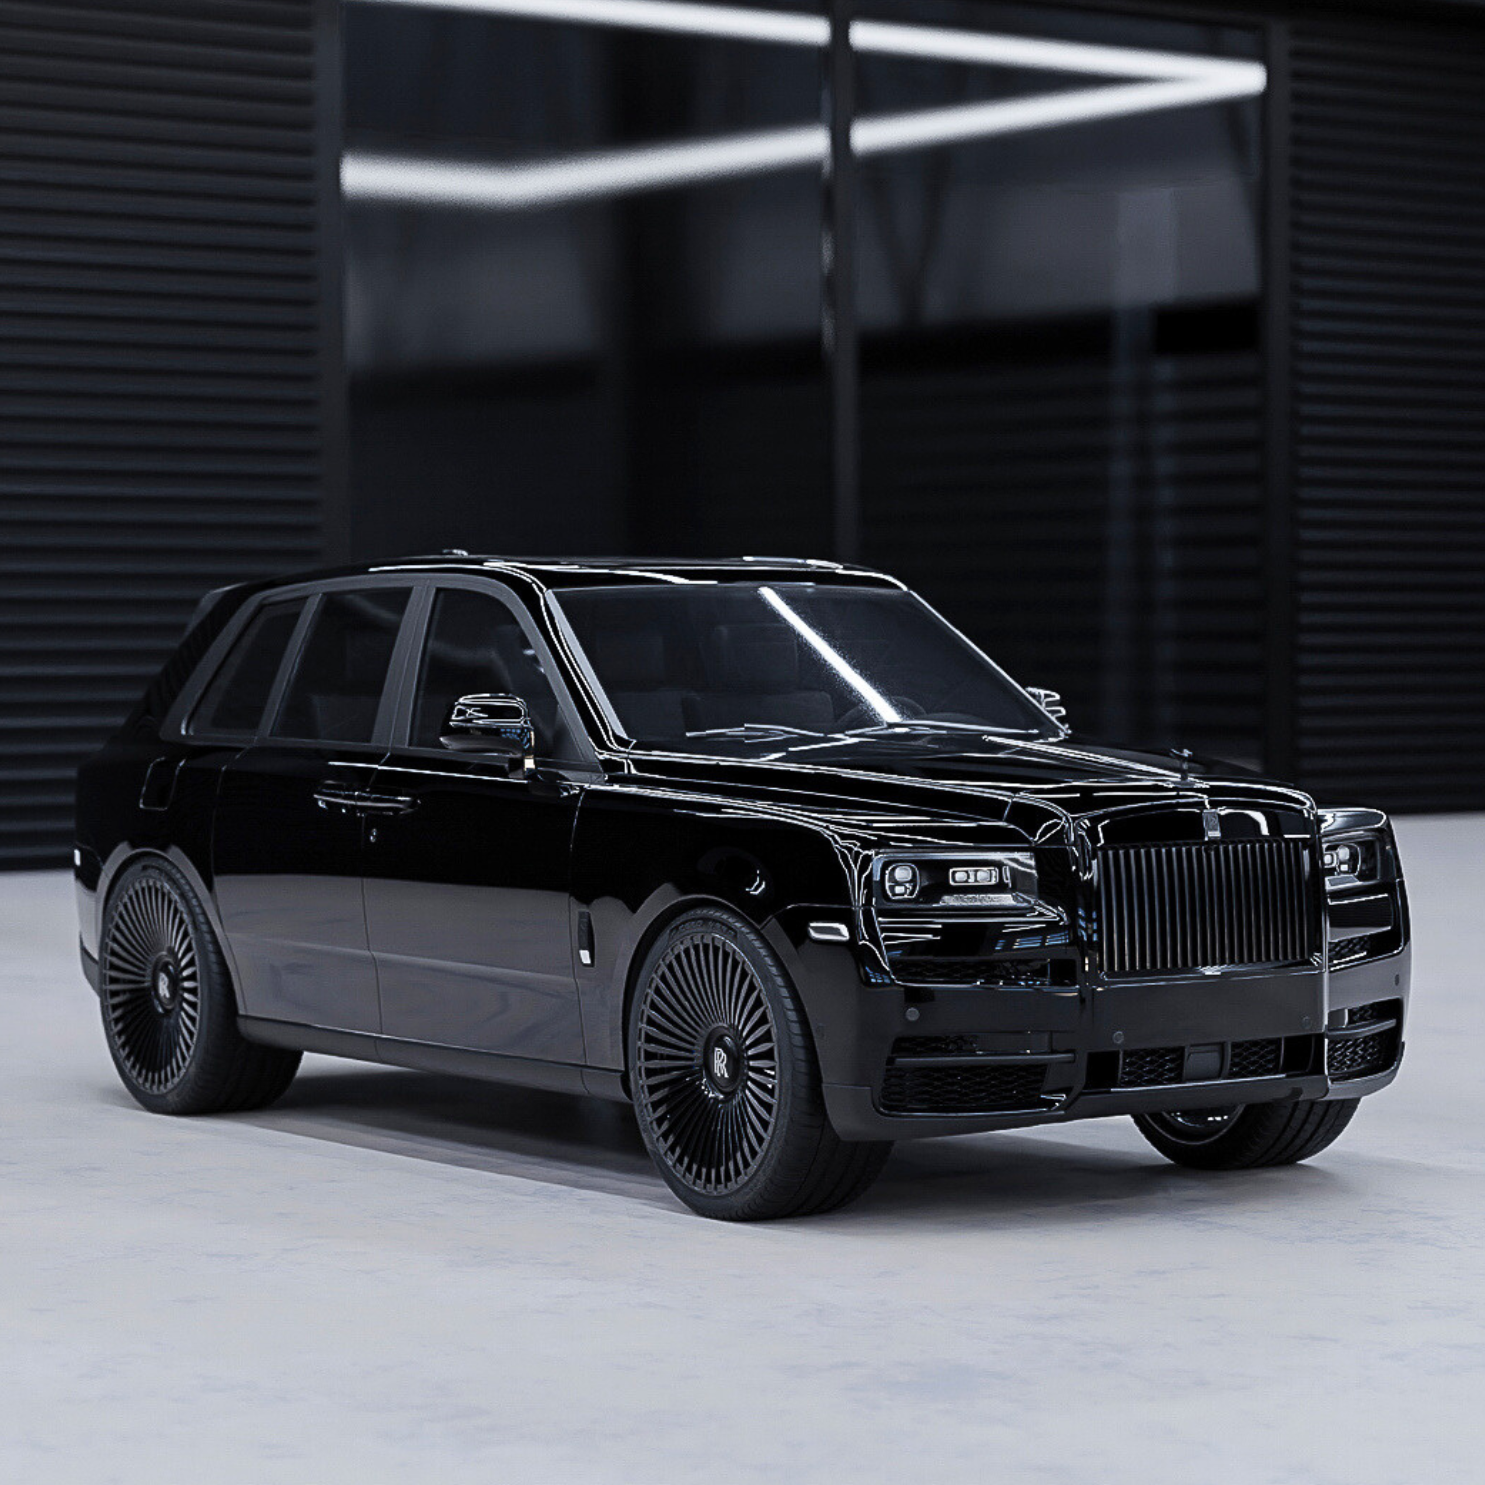 Personalize your Ghost, Wraith, Cullinan, or Spectre to reflect your unique taste with our exquisite range of finishes. From sophisticated chrome to bold black, LOMA offers a selection that transforms your wheels, ensuring your vehicle remains truly one-of-a-kind.